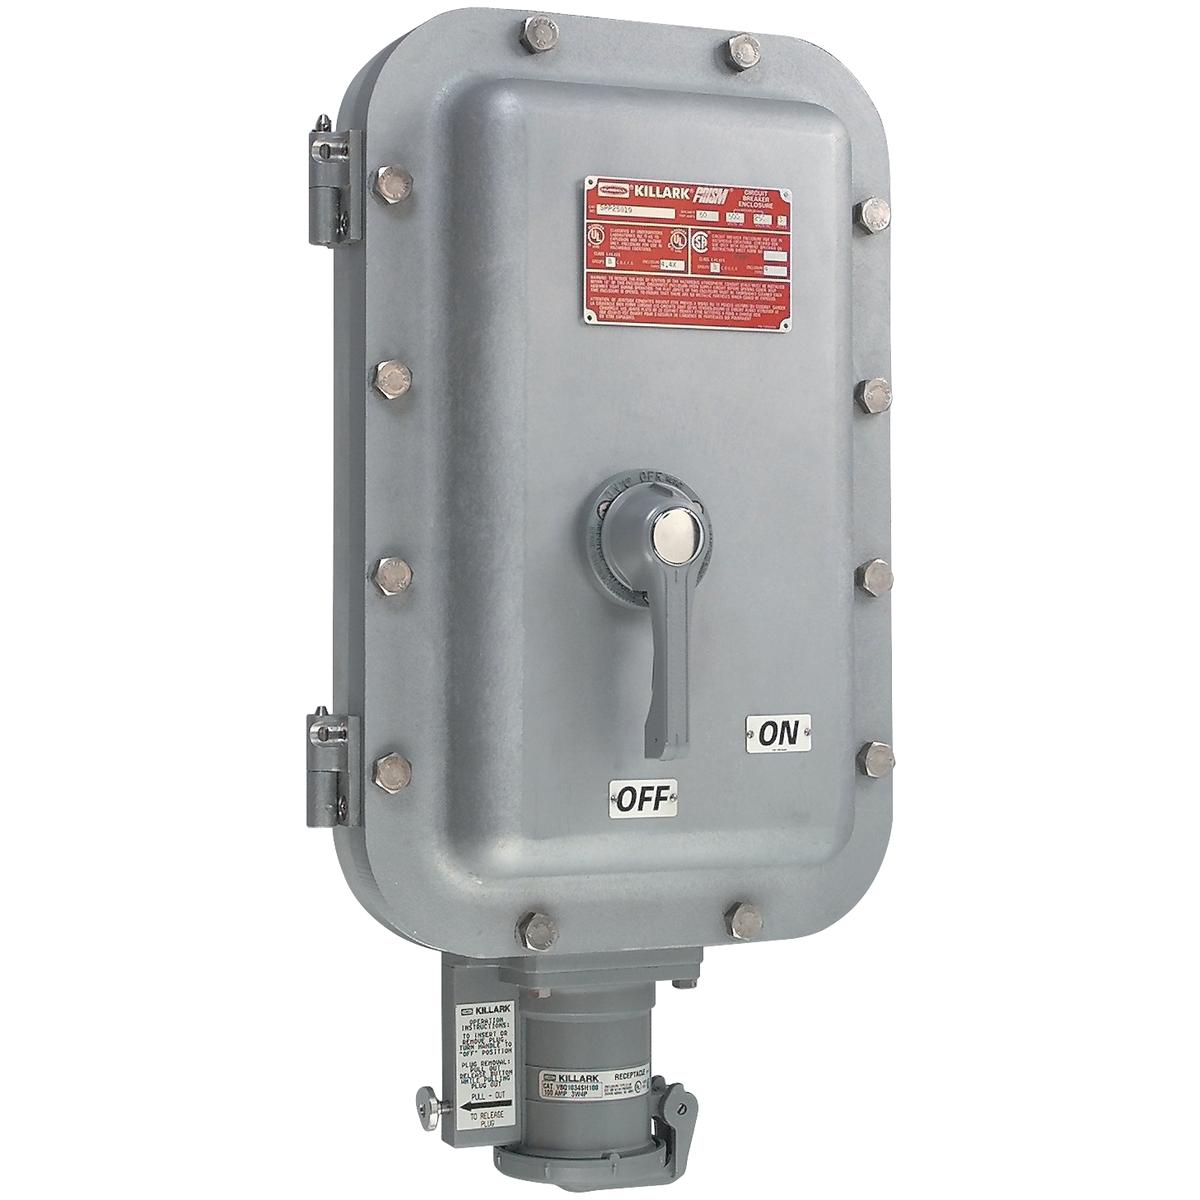 Hubbell VBQ6023CH50 Cutler-Hammer - FD Series 60A Receptacle 50A Breaker 2W3P  ; Plug Interlock Mechanism for Dead-Front construction. Switch cannot be turned “ON” without fully inserted plug. Plug cannot be removed with switch in “ON”position ; Ground Fault Options Availabl